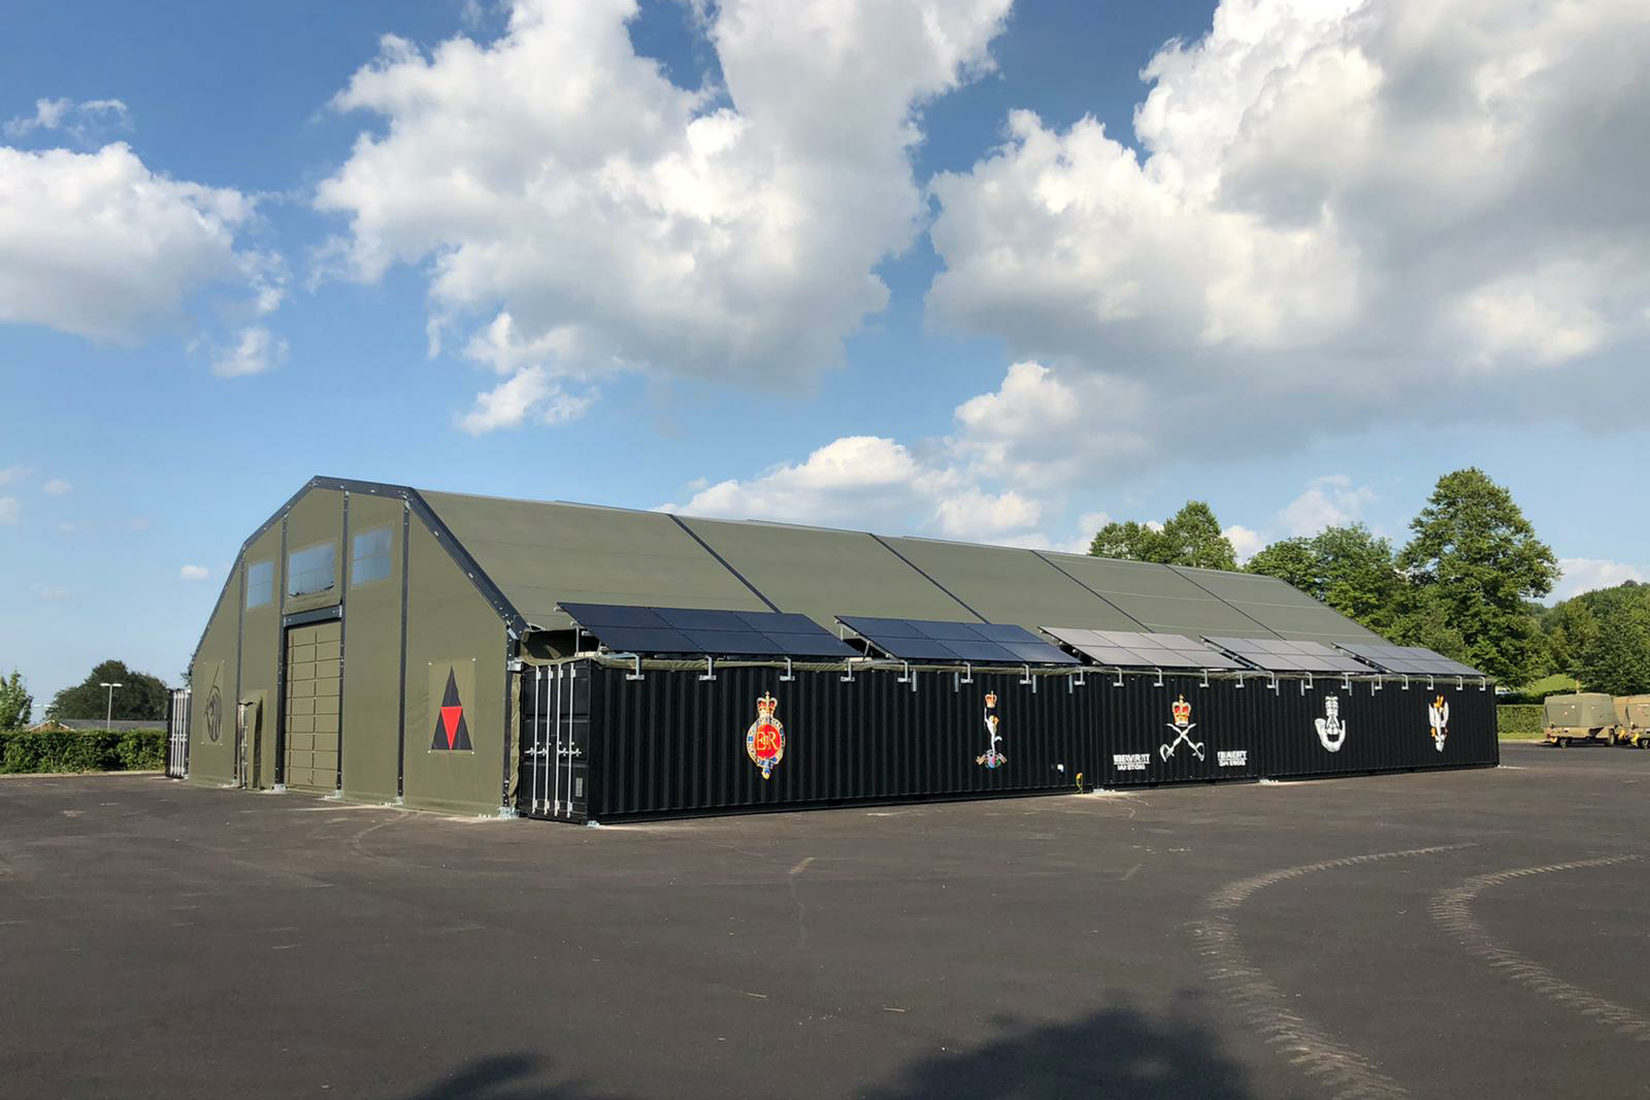 NIXUS supplied 3 Gyms for the British Army based on our unique Container Buildings. Each Gym is made up of 2 rows of ISO Containers bridged by a fabric roof. Overall size is 100ft x 60ft.